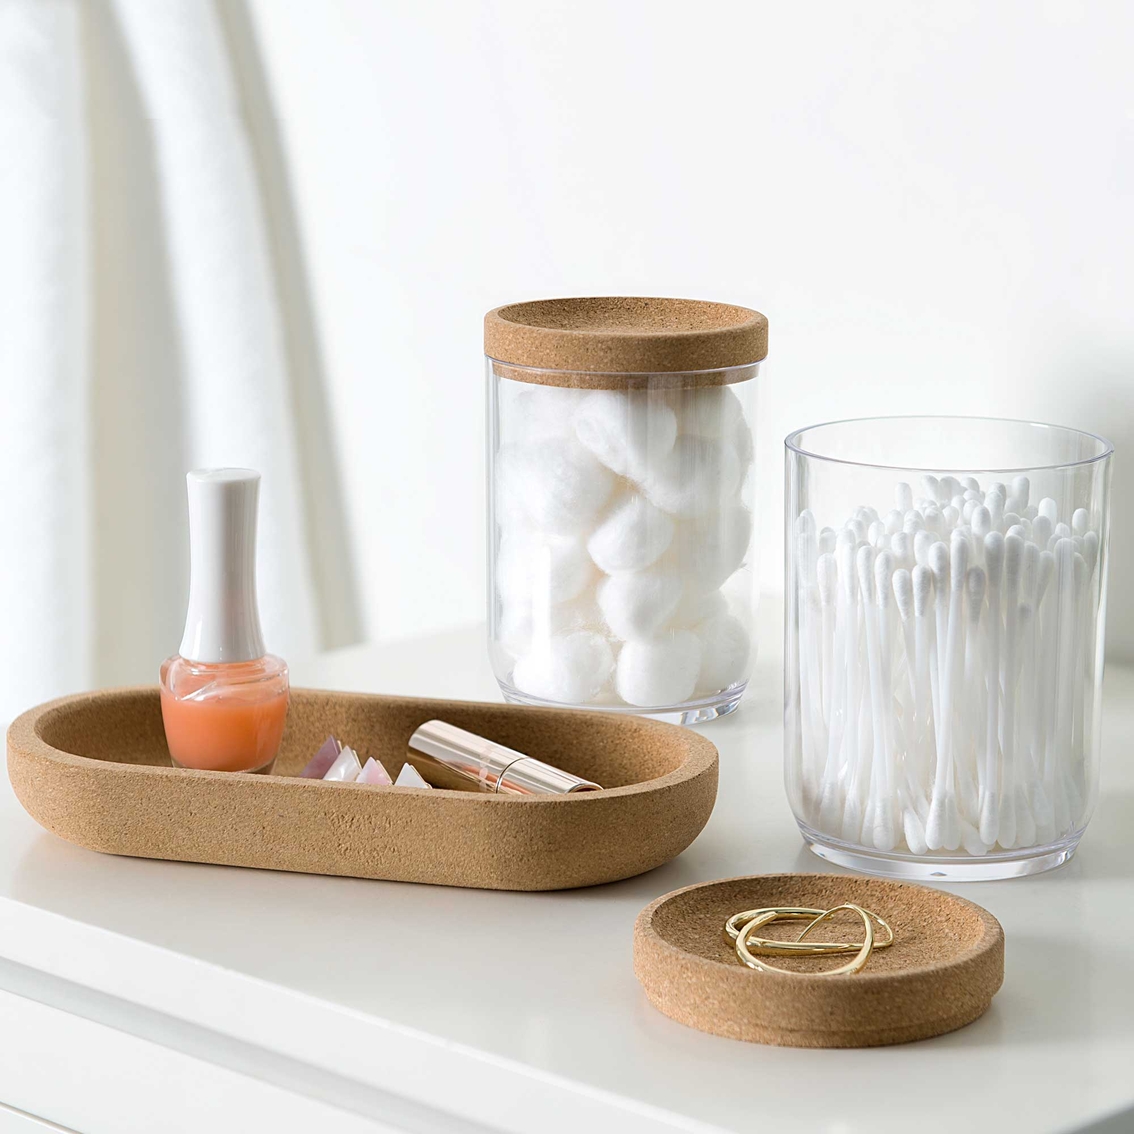 Allure Canister Set with Cork Tray - Image 3 of 3